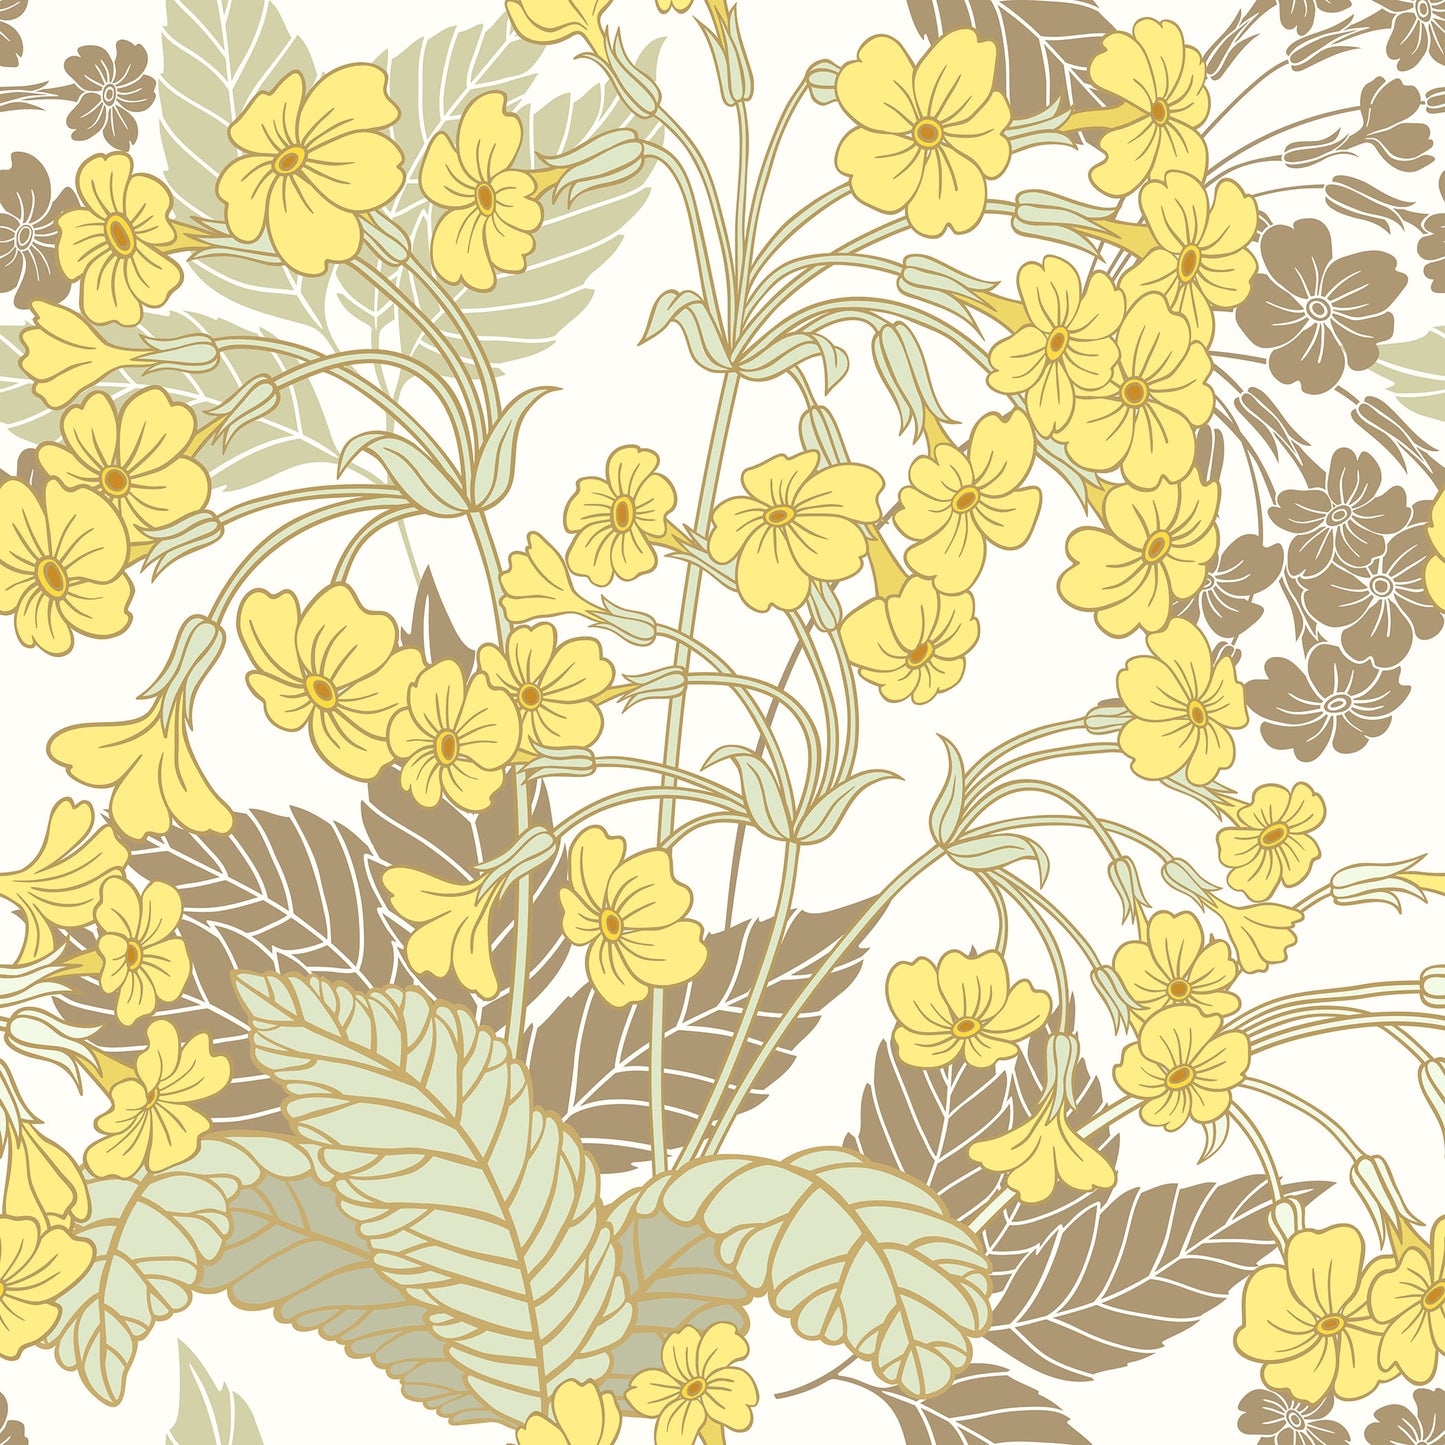 Whimsical yellow and brown vintage primrose floral pattern on cream background easy to install and remove peel and stick custom wallpaper available in different lengths/sizes locally created and printed in Canada wallpaper. Washable, durable, commercial grade, removable and waterproof.